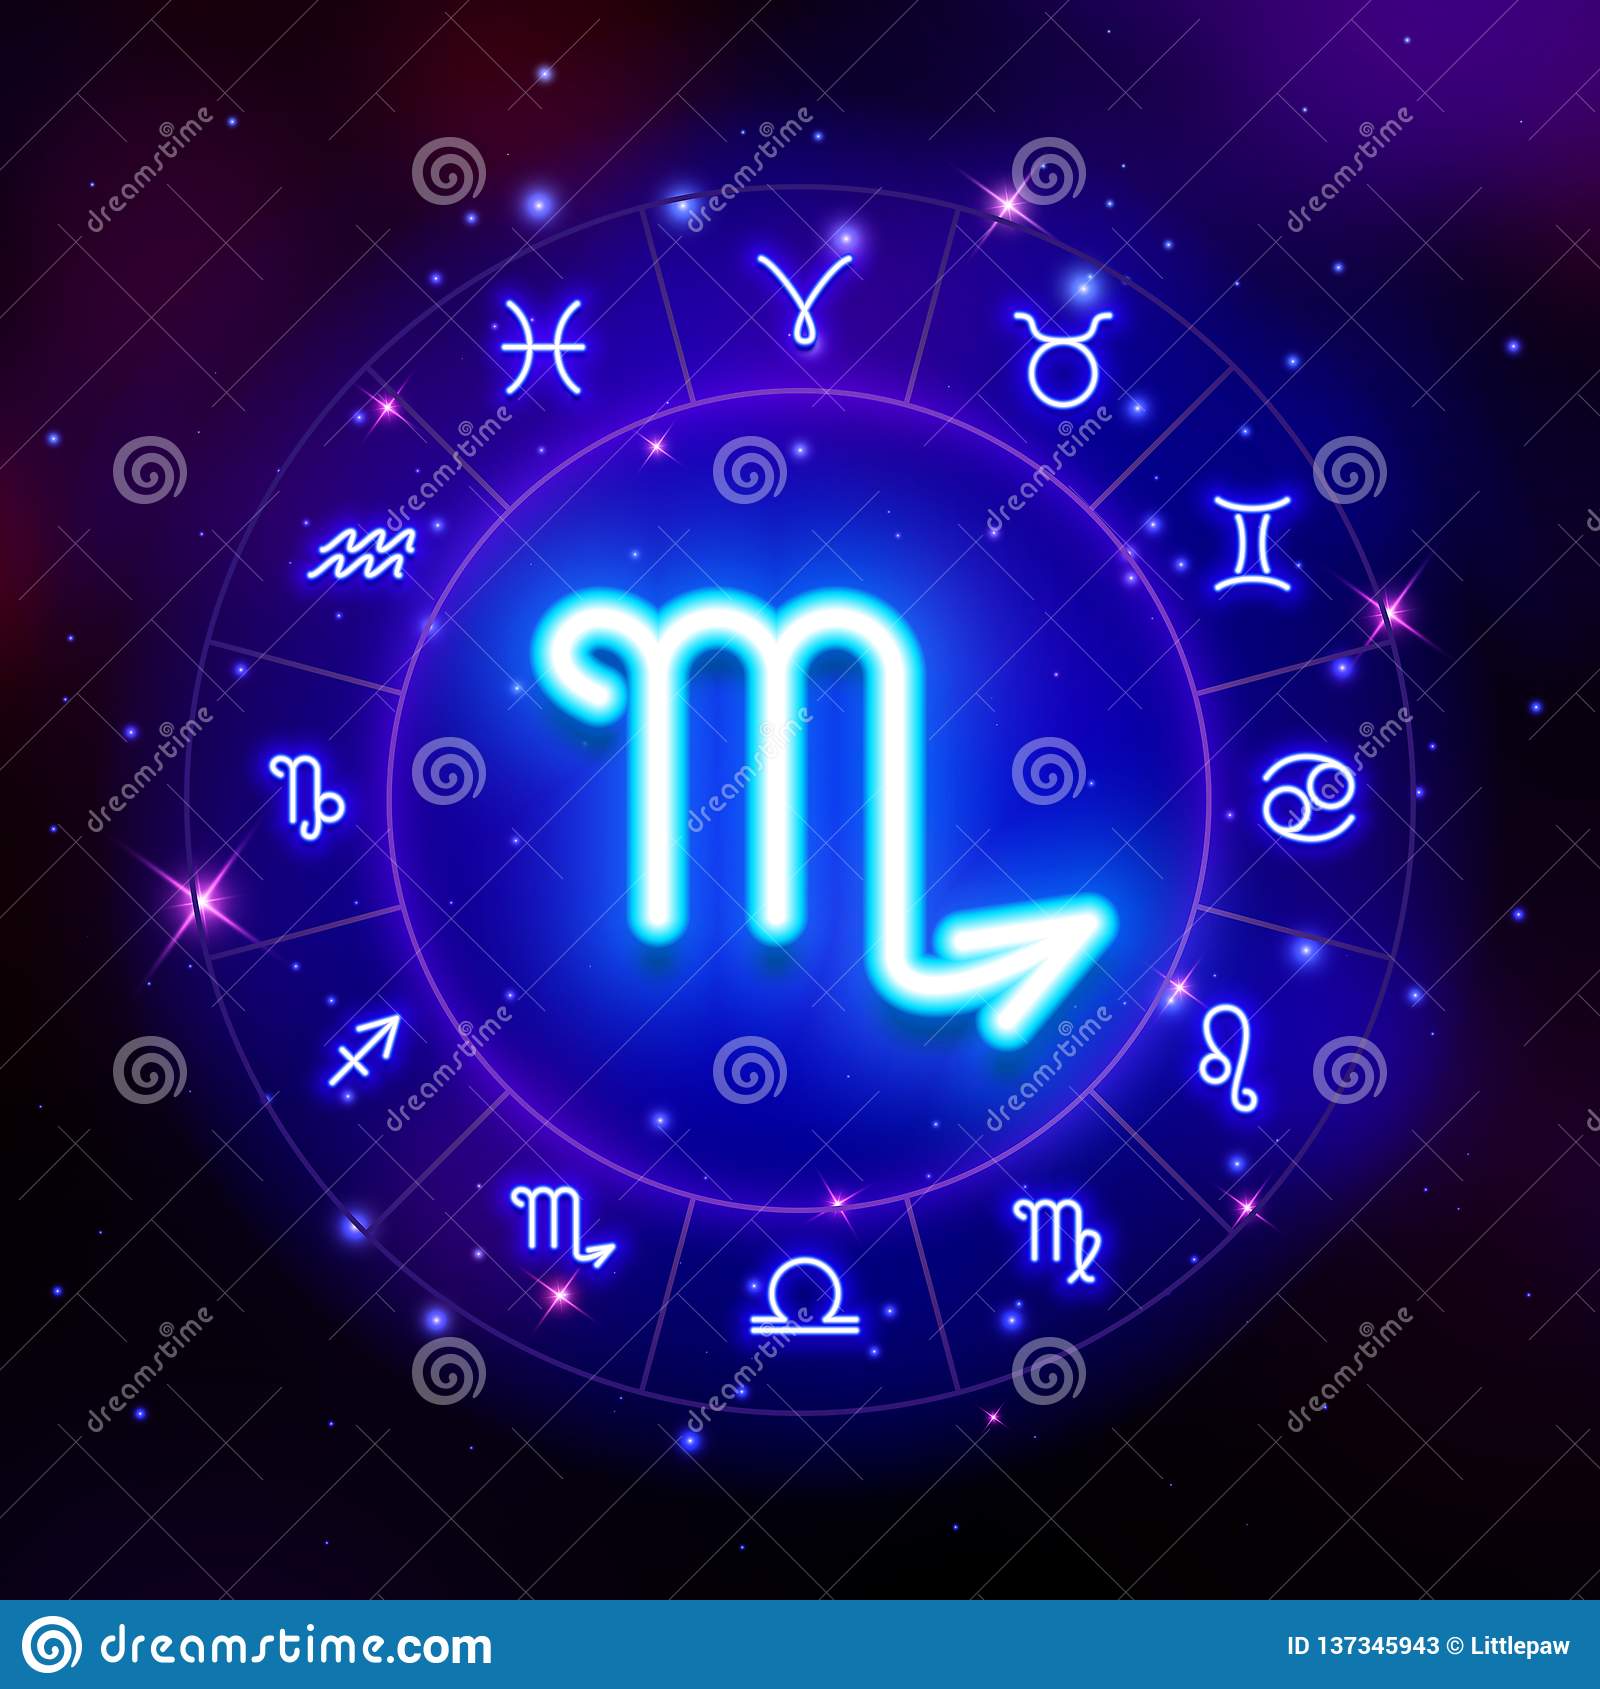 Detail Images Of Scorpio Zodiac Sign Nomer 4